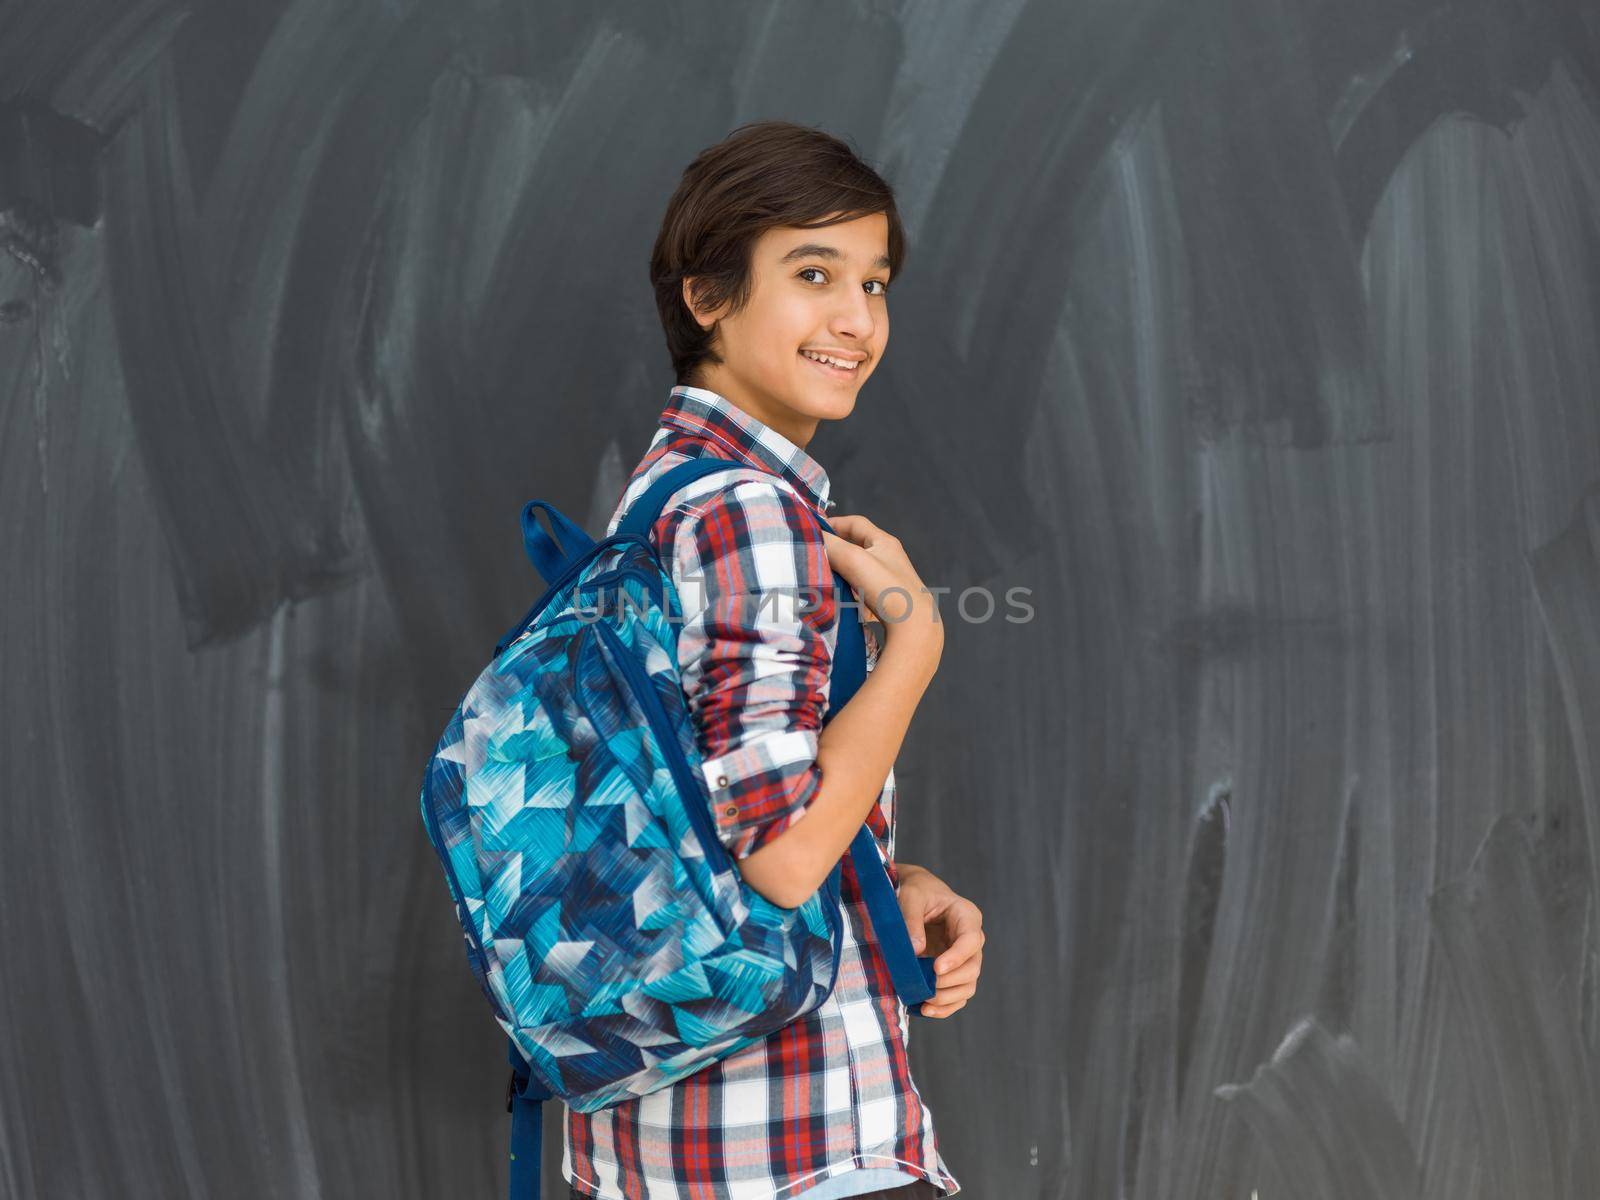 Arab teenager with backpack wearing casual school look against a black chalkboard background. High quality photo